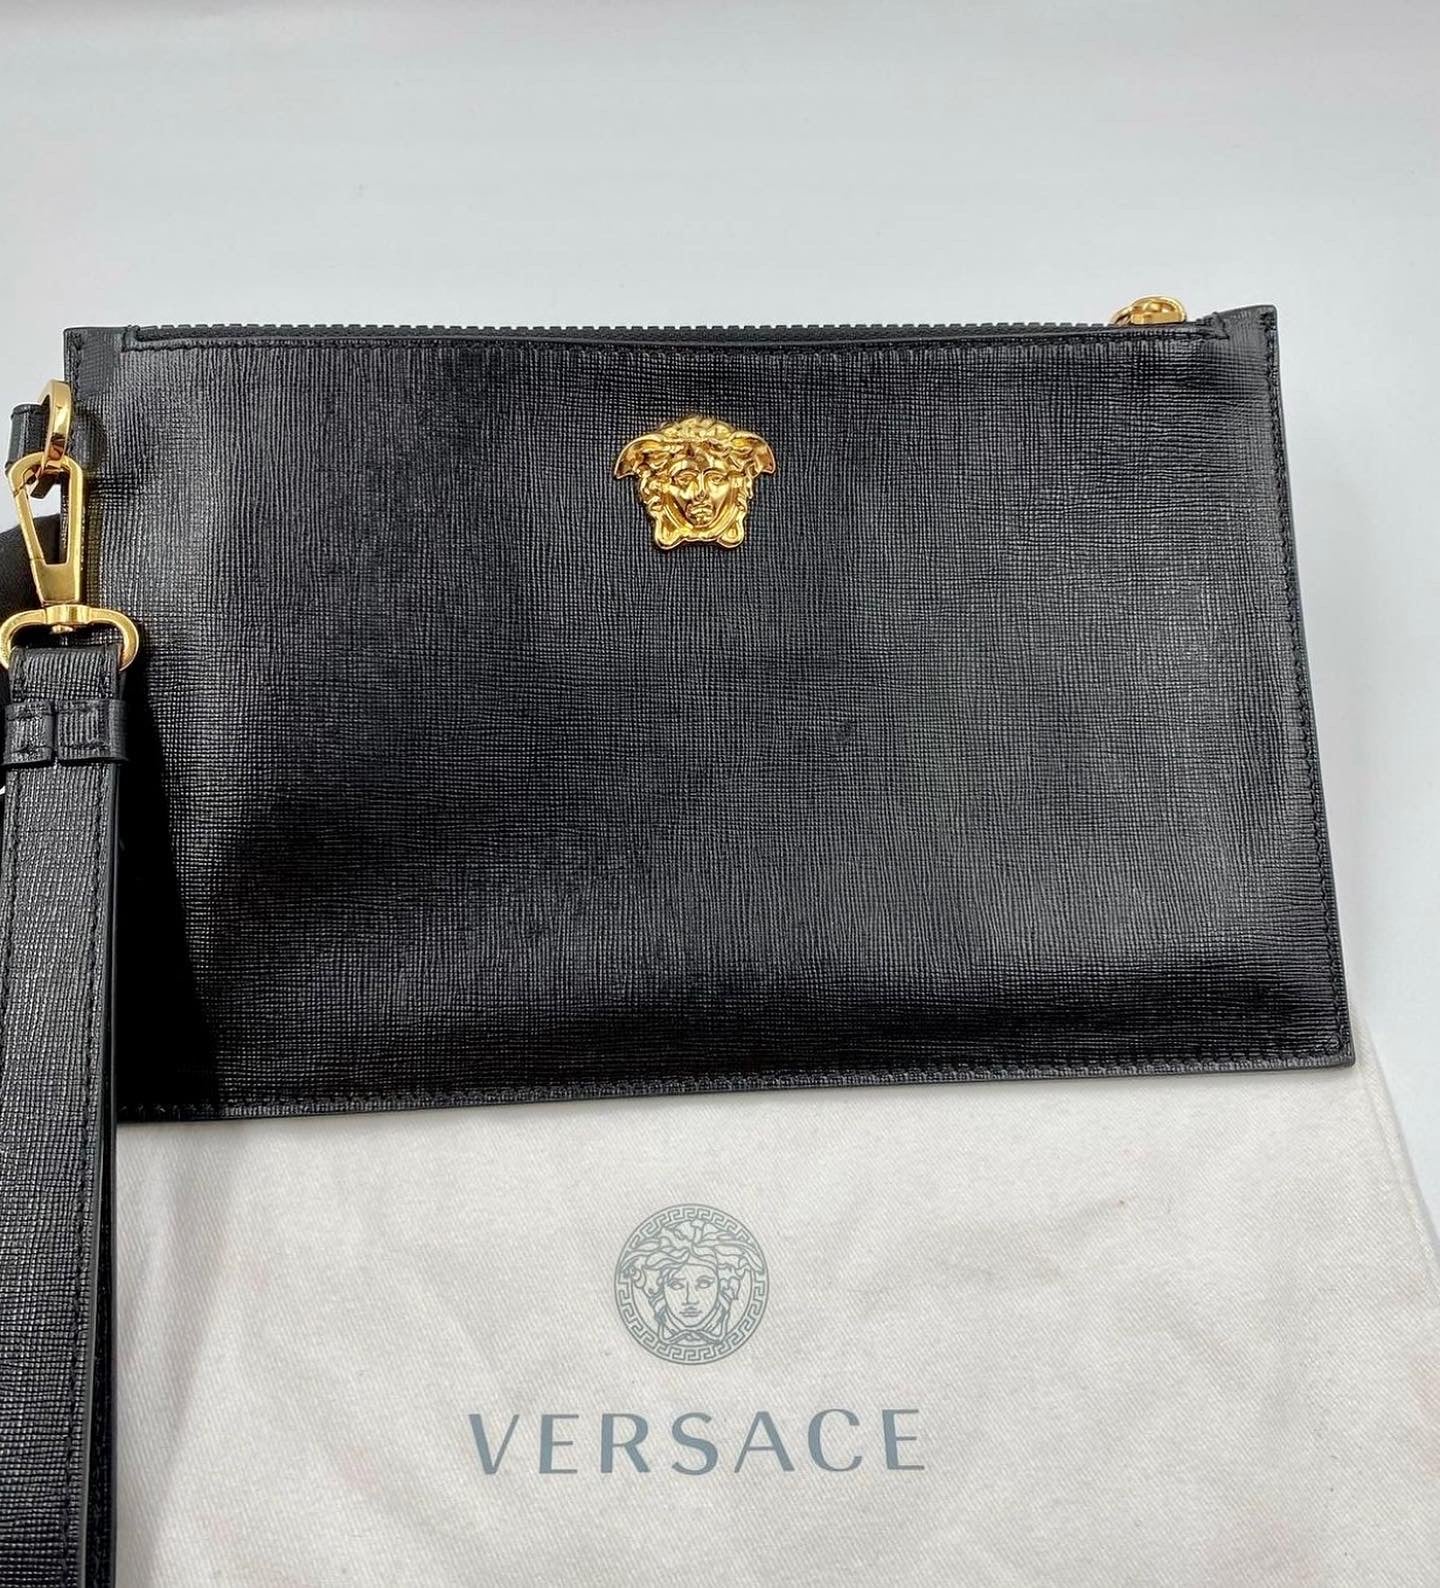 Authentic Versace Leather Clutch